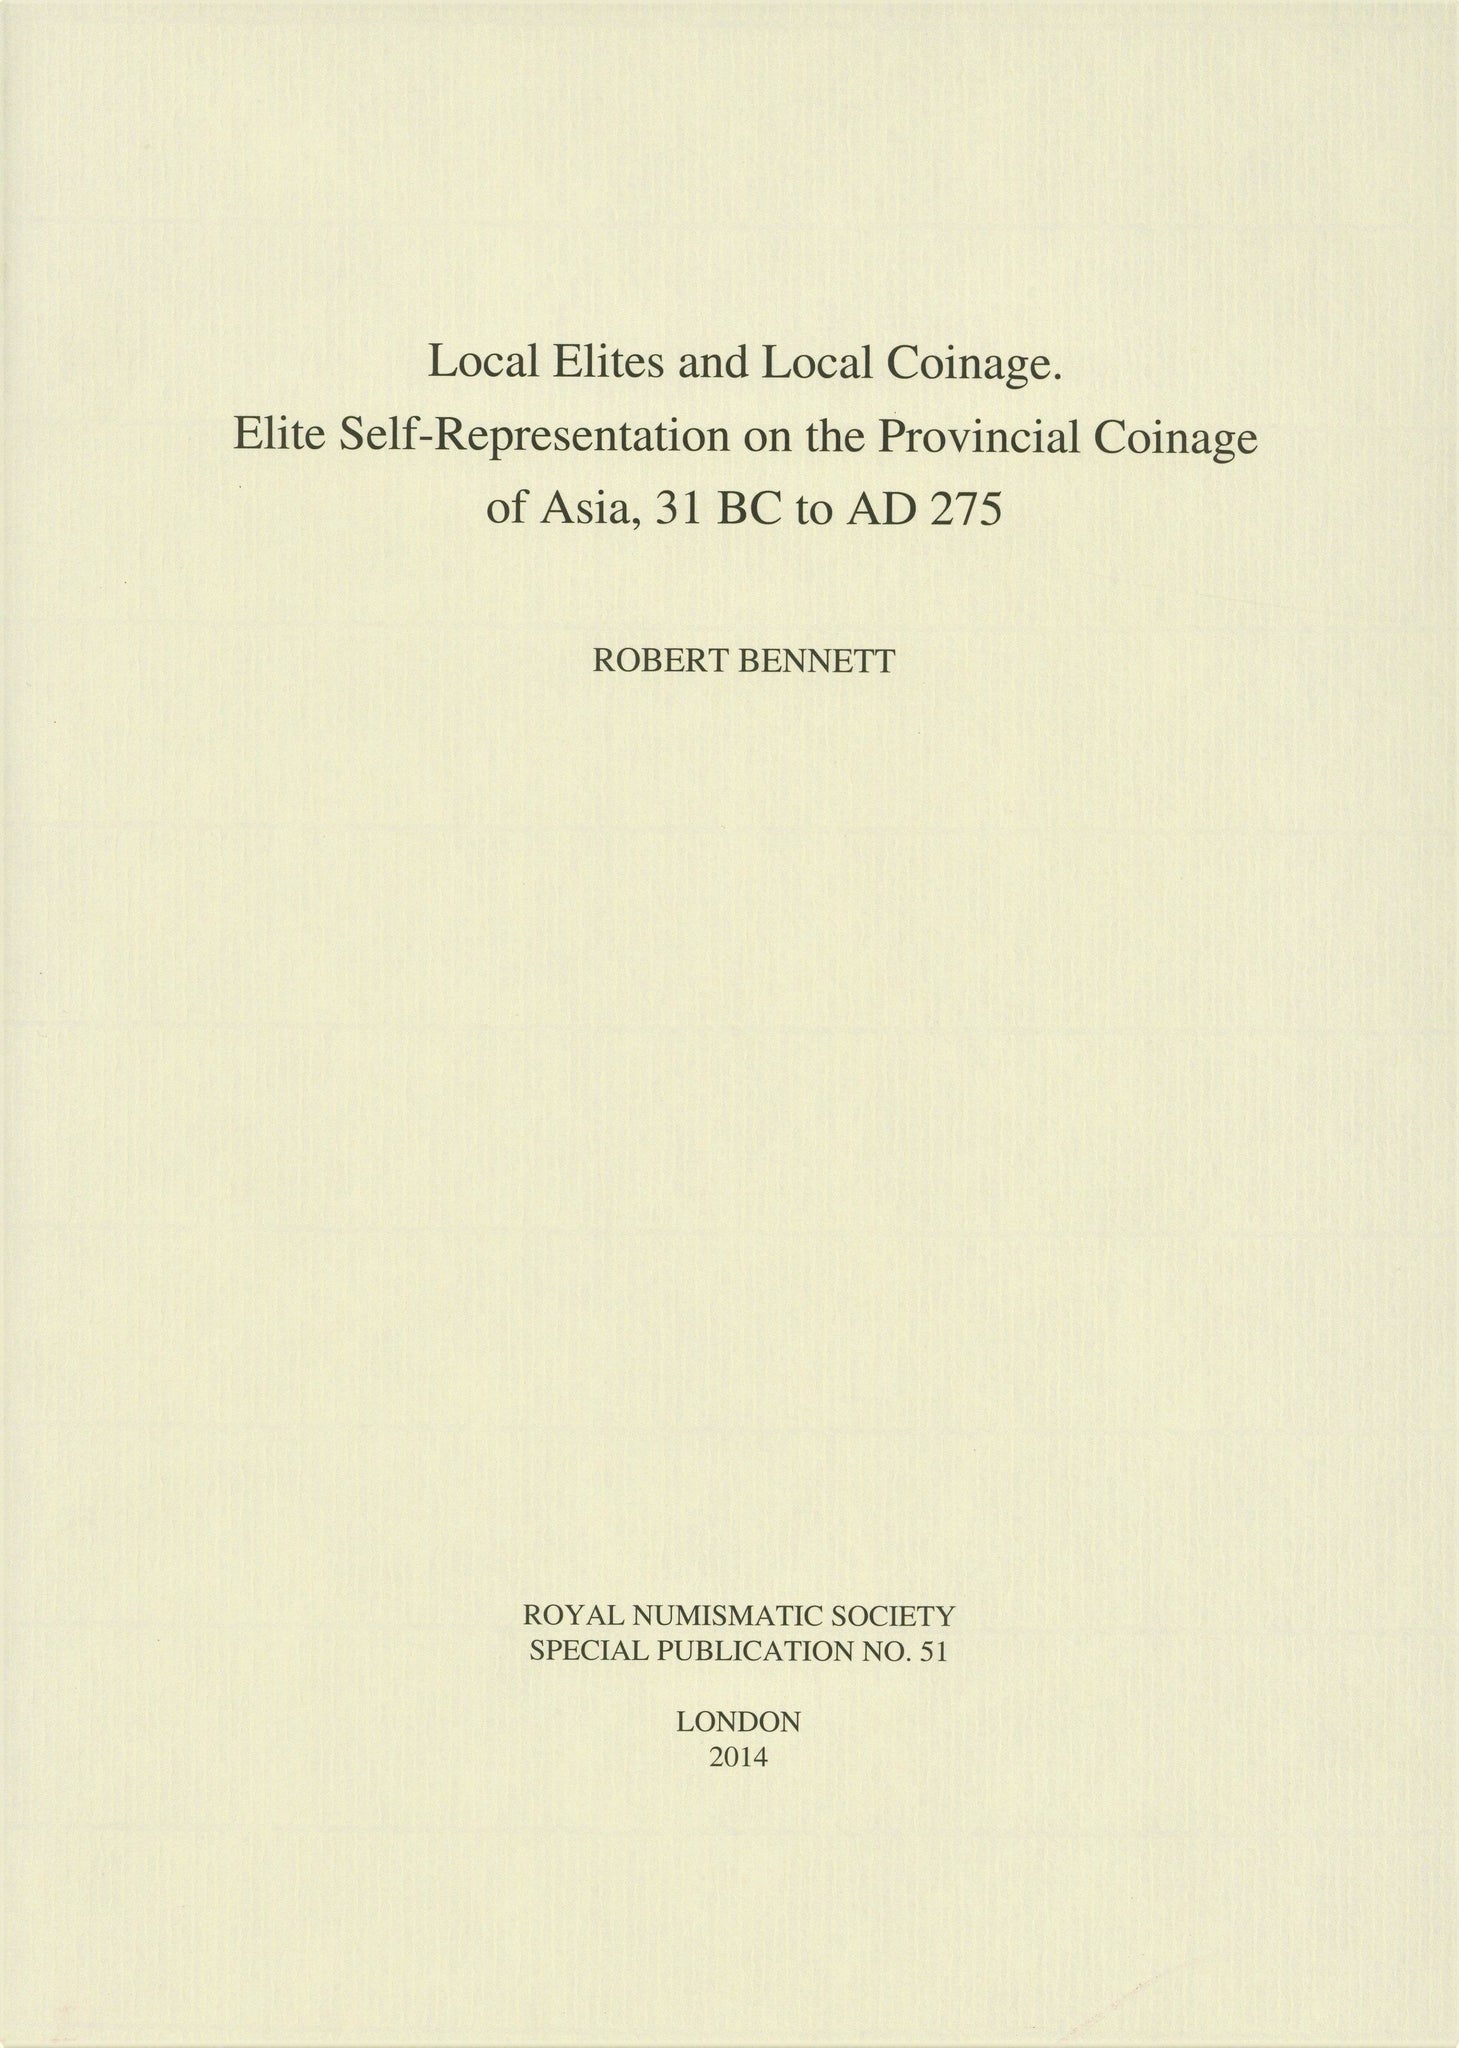 Local Elites and Local Coinage: Elite Self-Representation on the Provincial Coinage of Asia 31 BC - AD 275 by Bennett, Robert RNS SP51